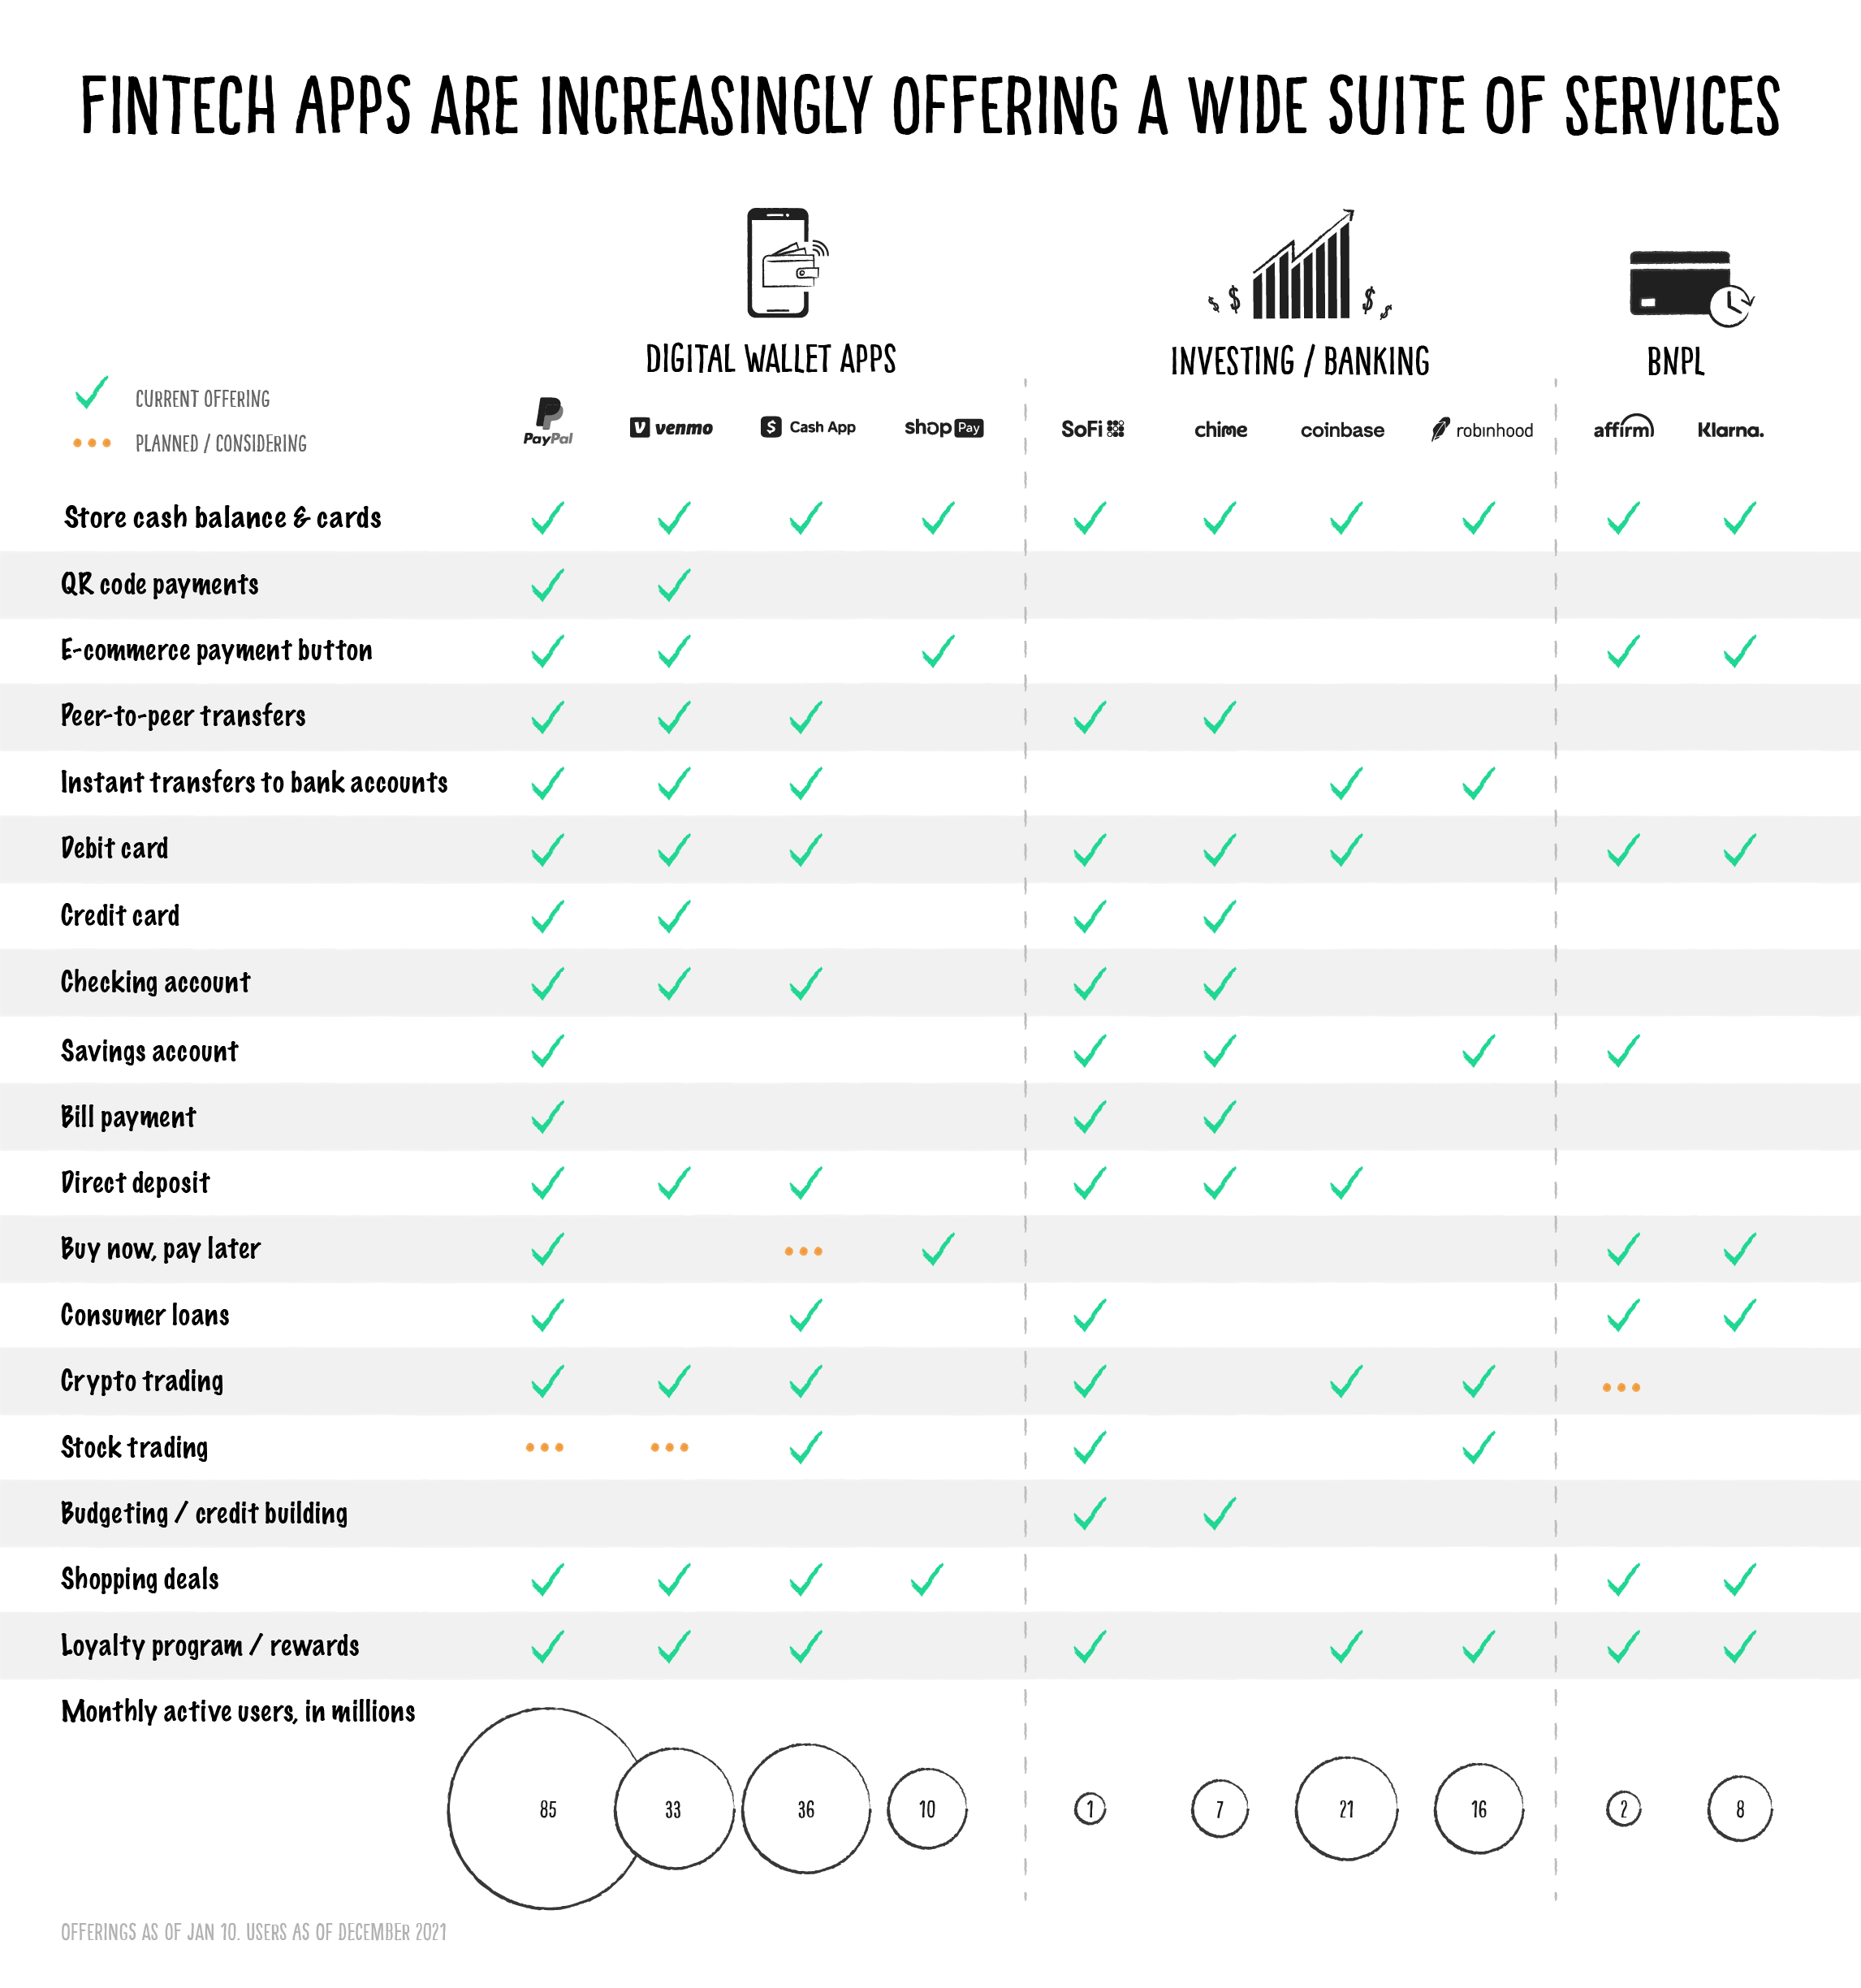 Fintech apps are increasingly adding a wide suite of services